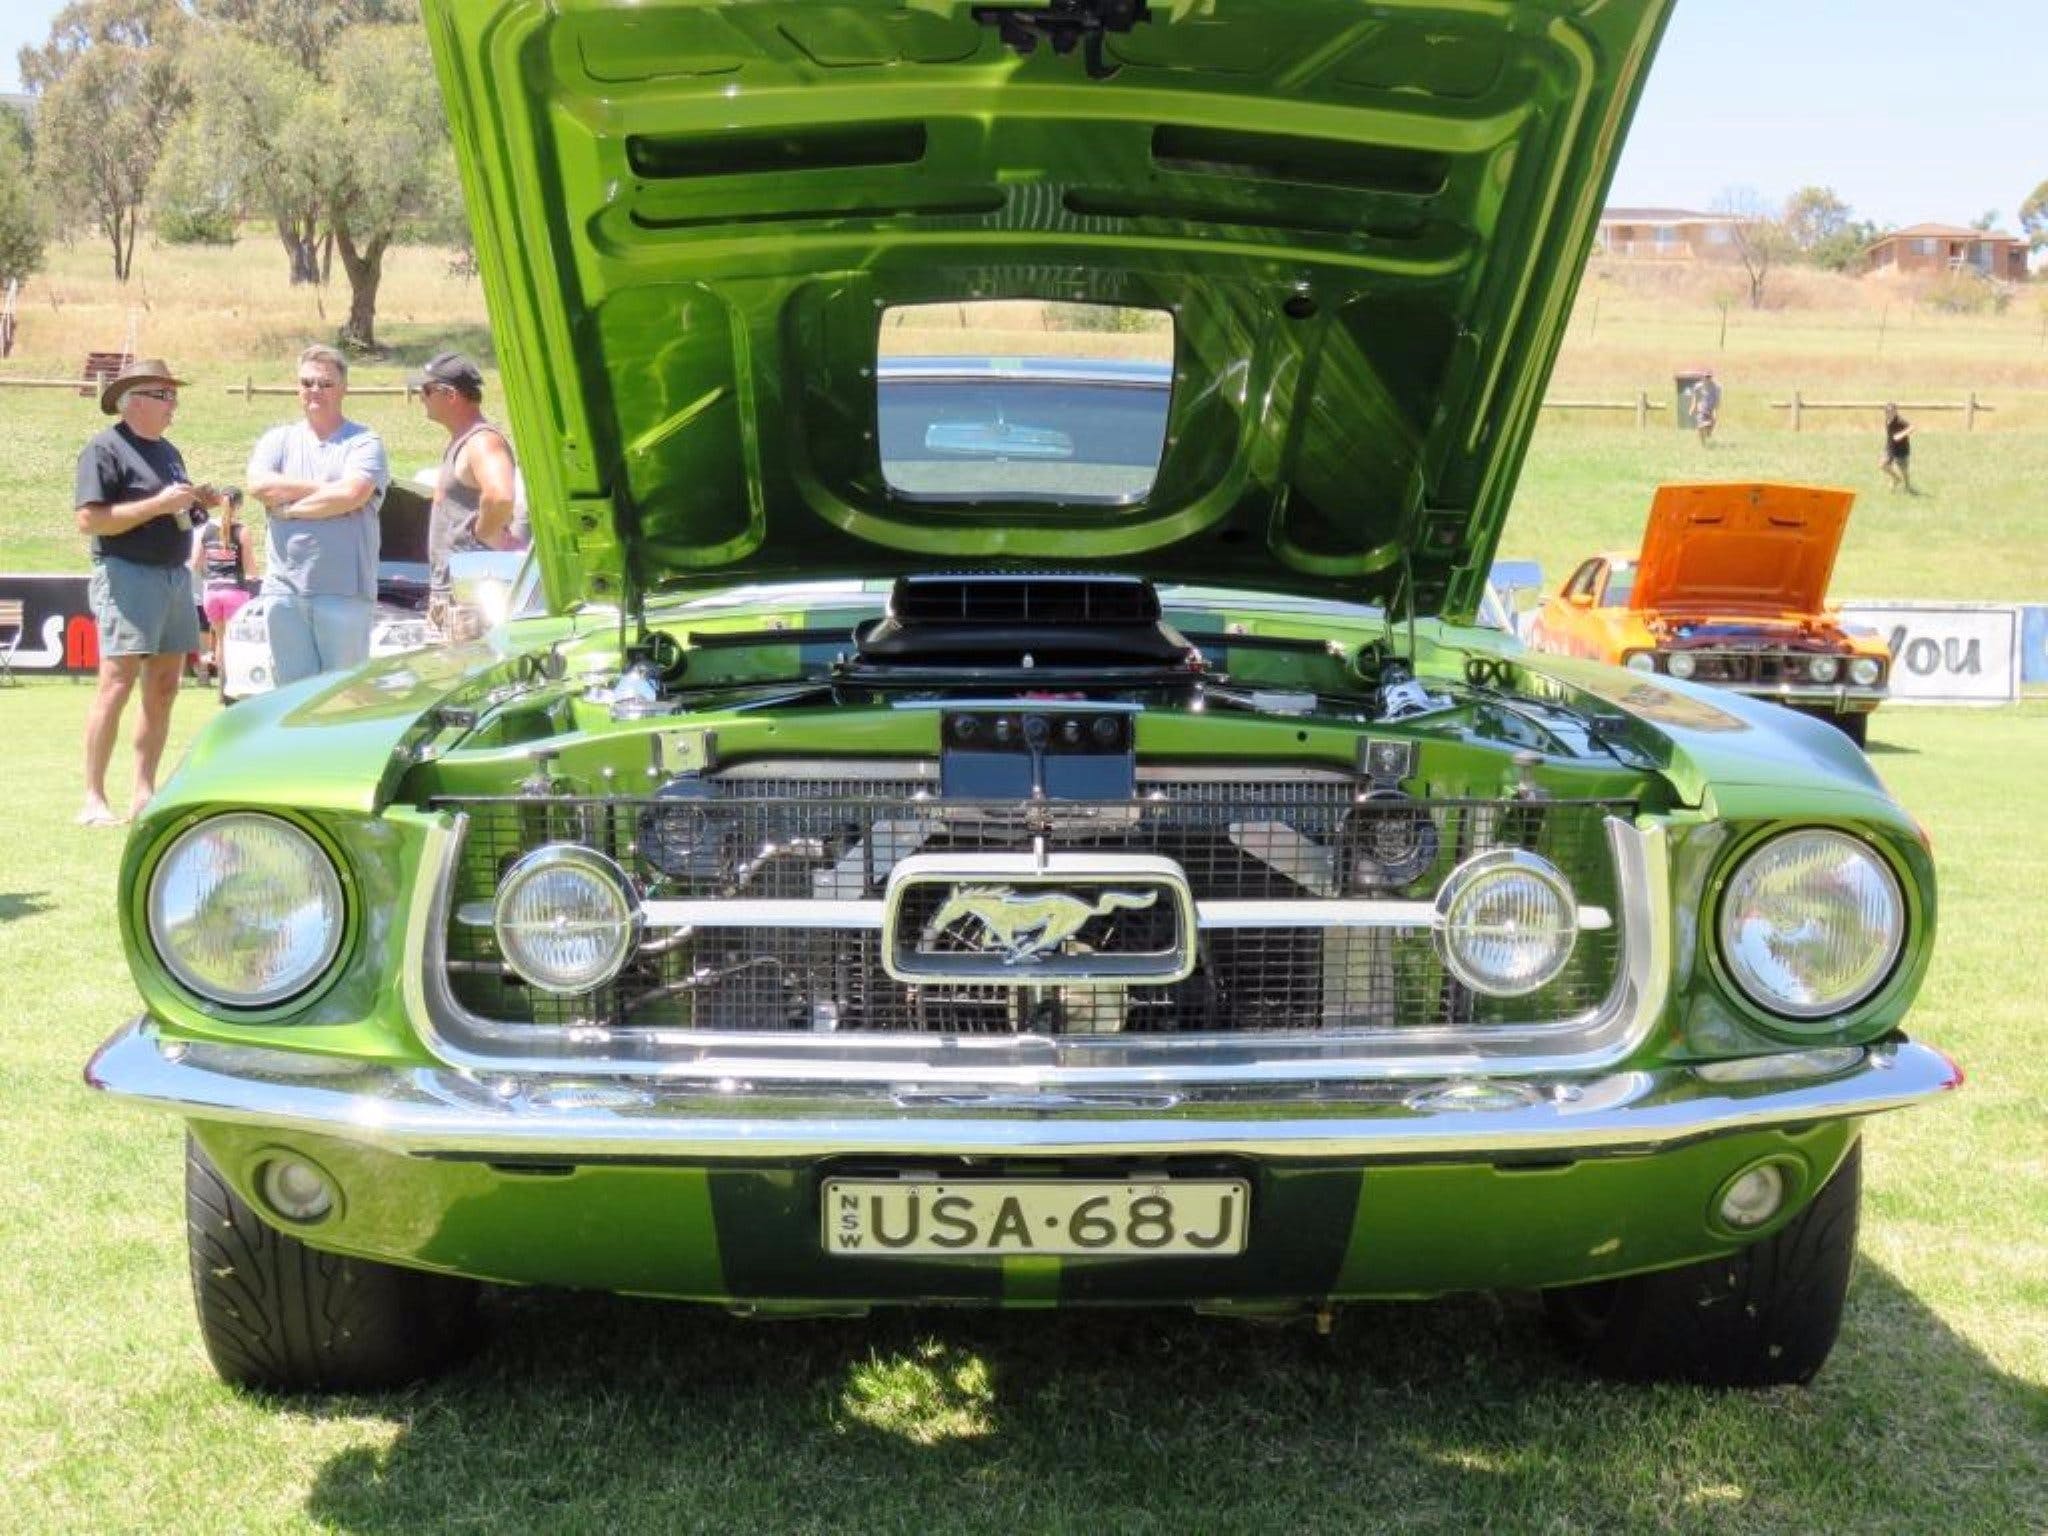 Central West Car Club Charity Show and Shine - Melbourne Tourism